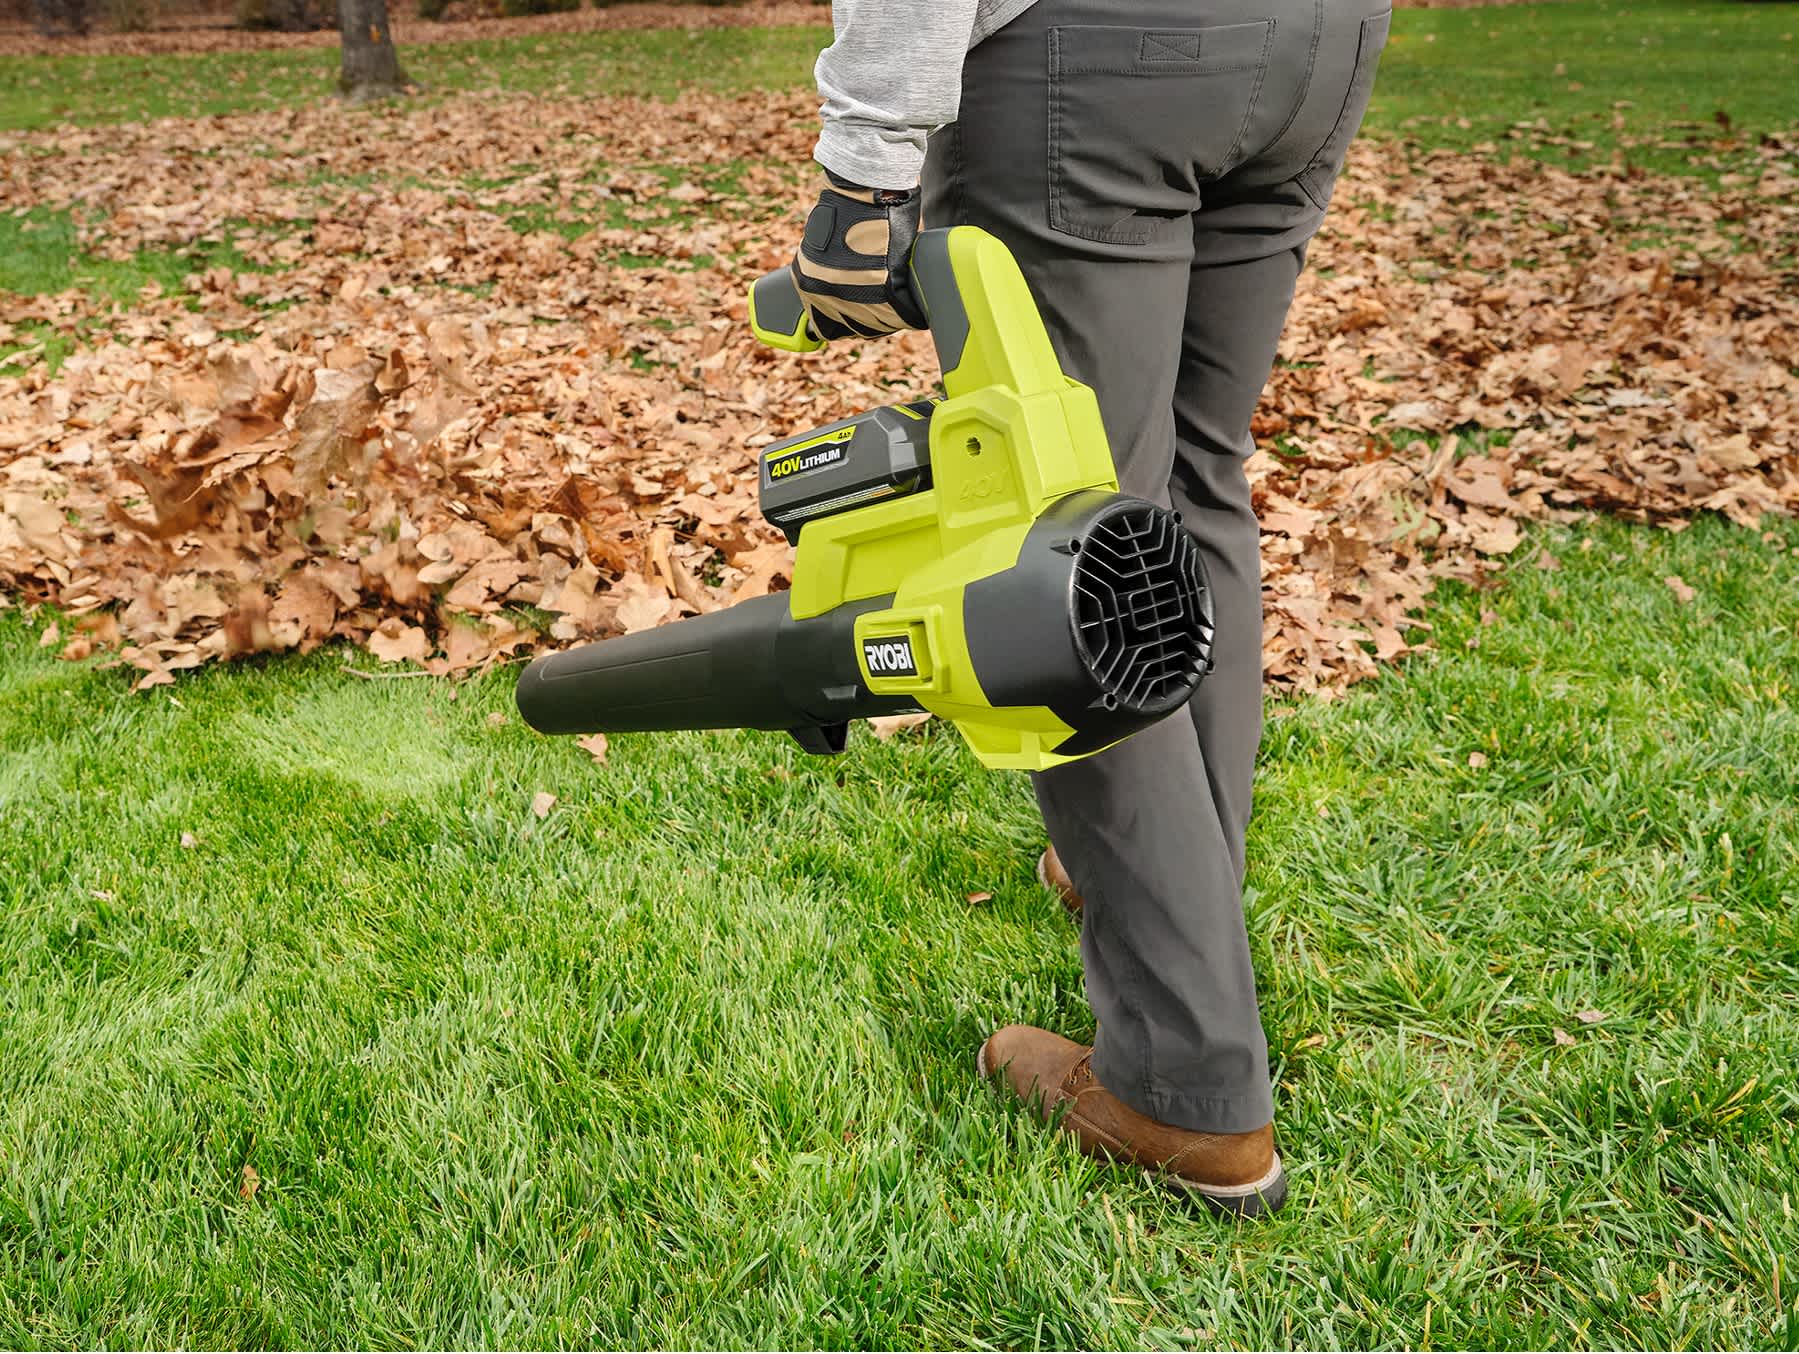 Product Features Image for 40V LITHIUM-ION CORDLESS 450 CFM AXIAL LEAF BLOWER (TOOL ONLY).